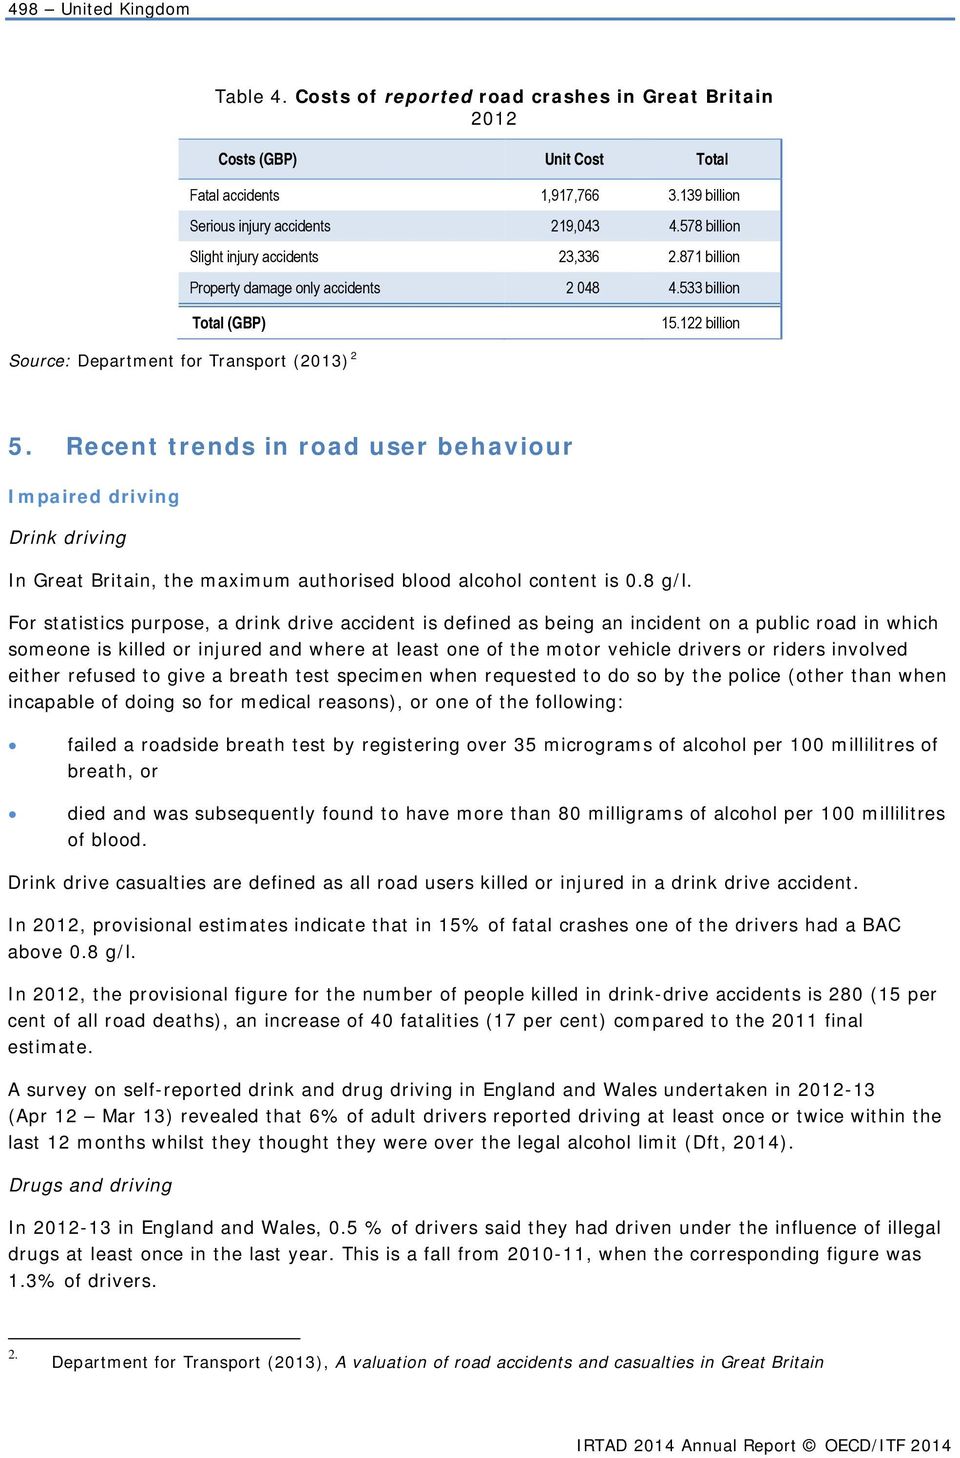 Recent trends in road user behaviour Impaired driving Drink driving In Great Britain, the maximum authorised blood alcohol content is 0.8 g/l.